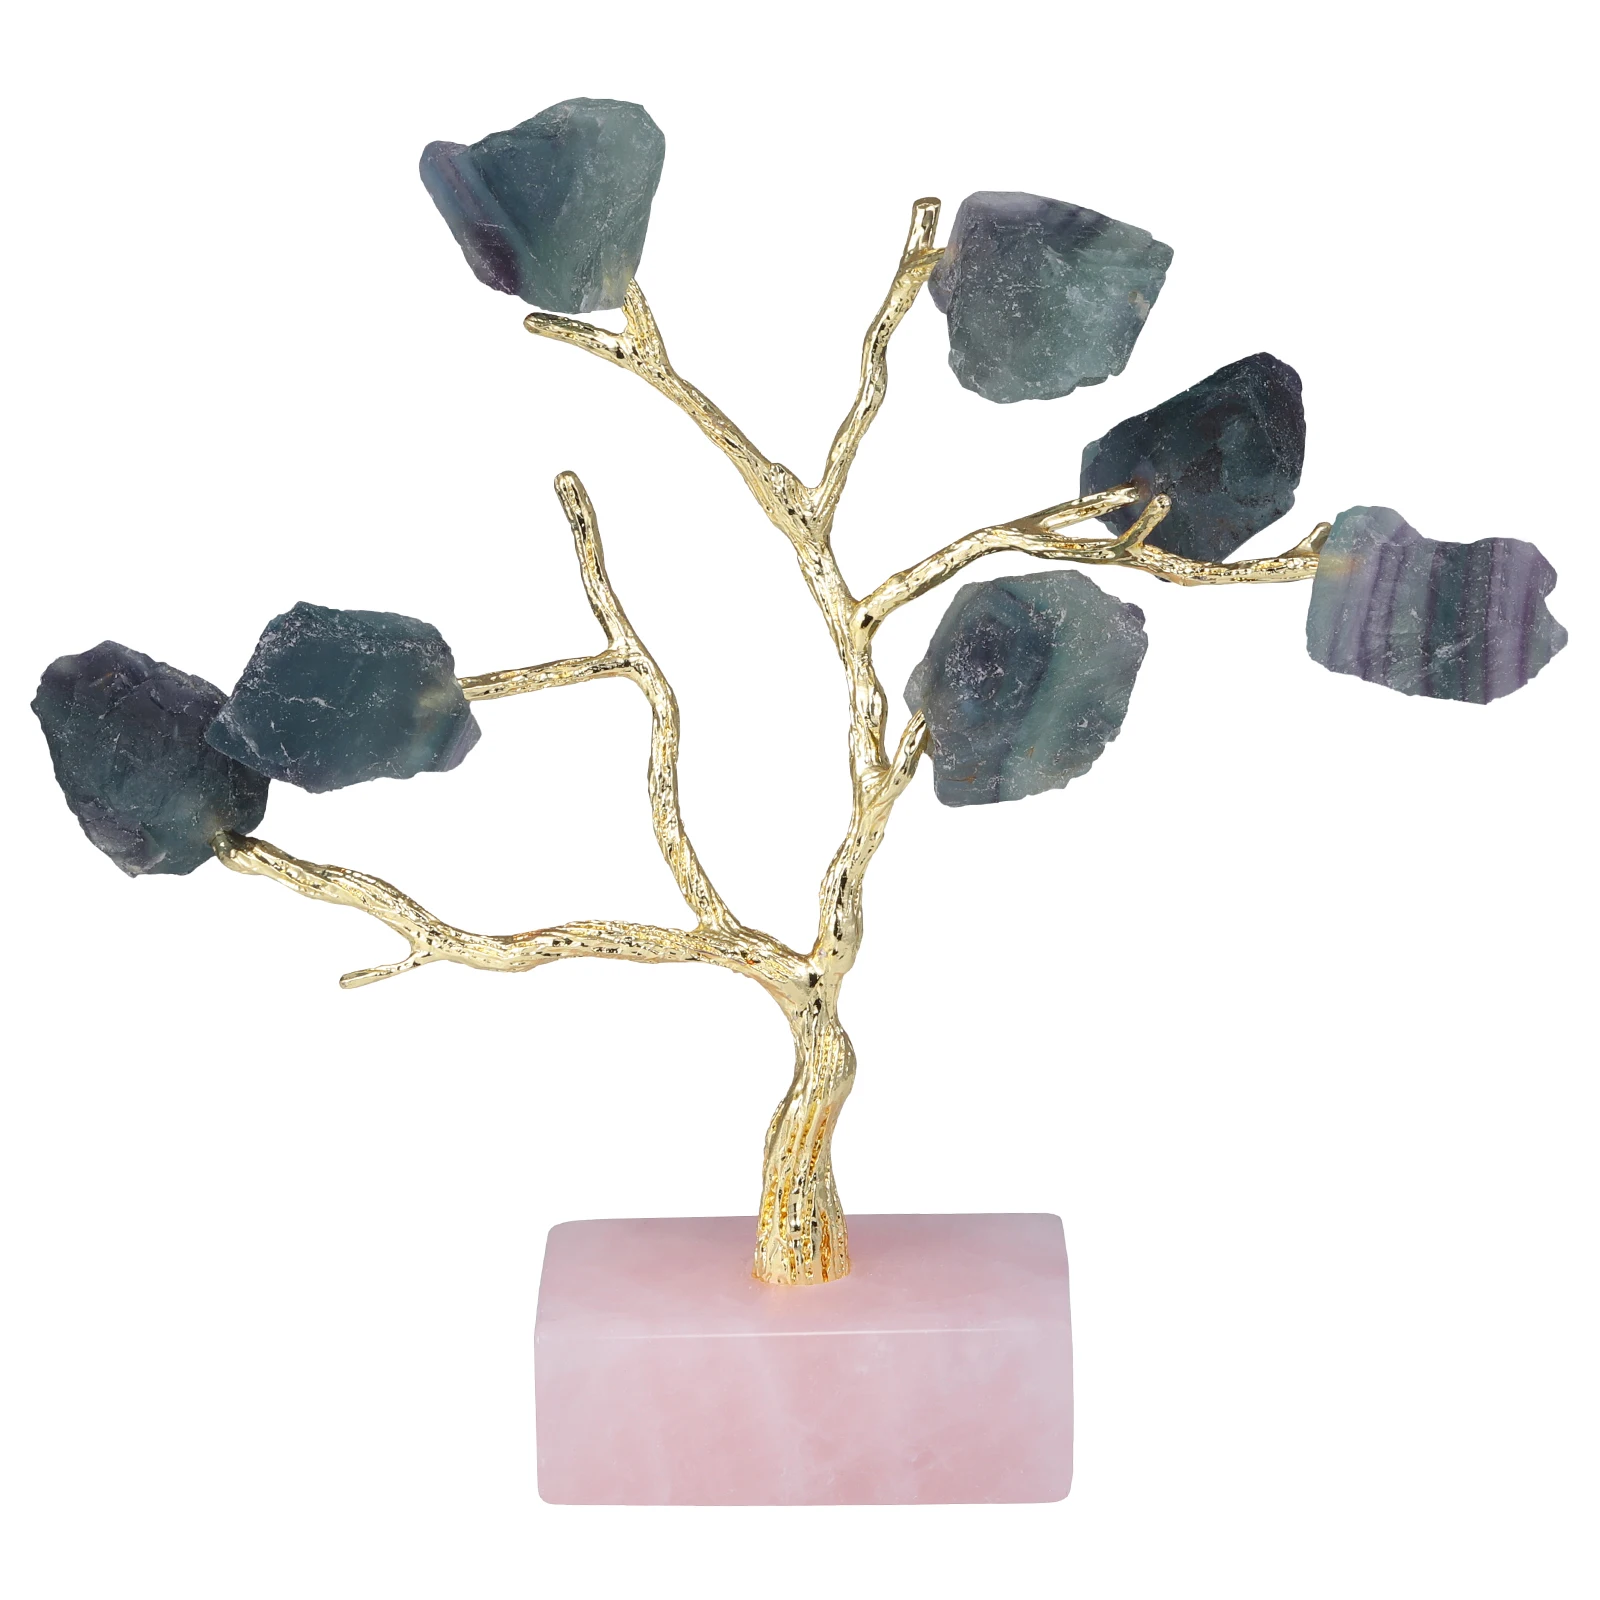 Natural Rough Crystal Stone Tree With Rose Quartz Base Healing Gemstone Golden Tree For Jewelry Organizer Home Table Decoration natural rose quartz rough stone reiki wind chimes hearling wall hanging ornaments home decoration living room decor lucky gift